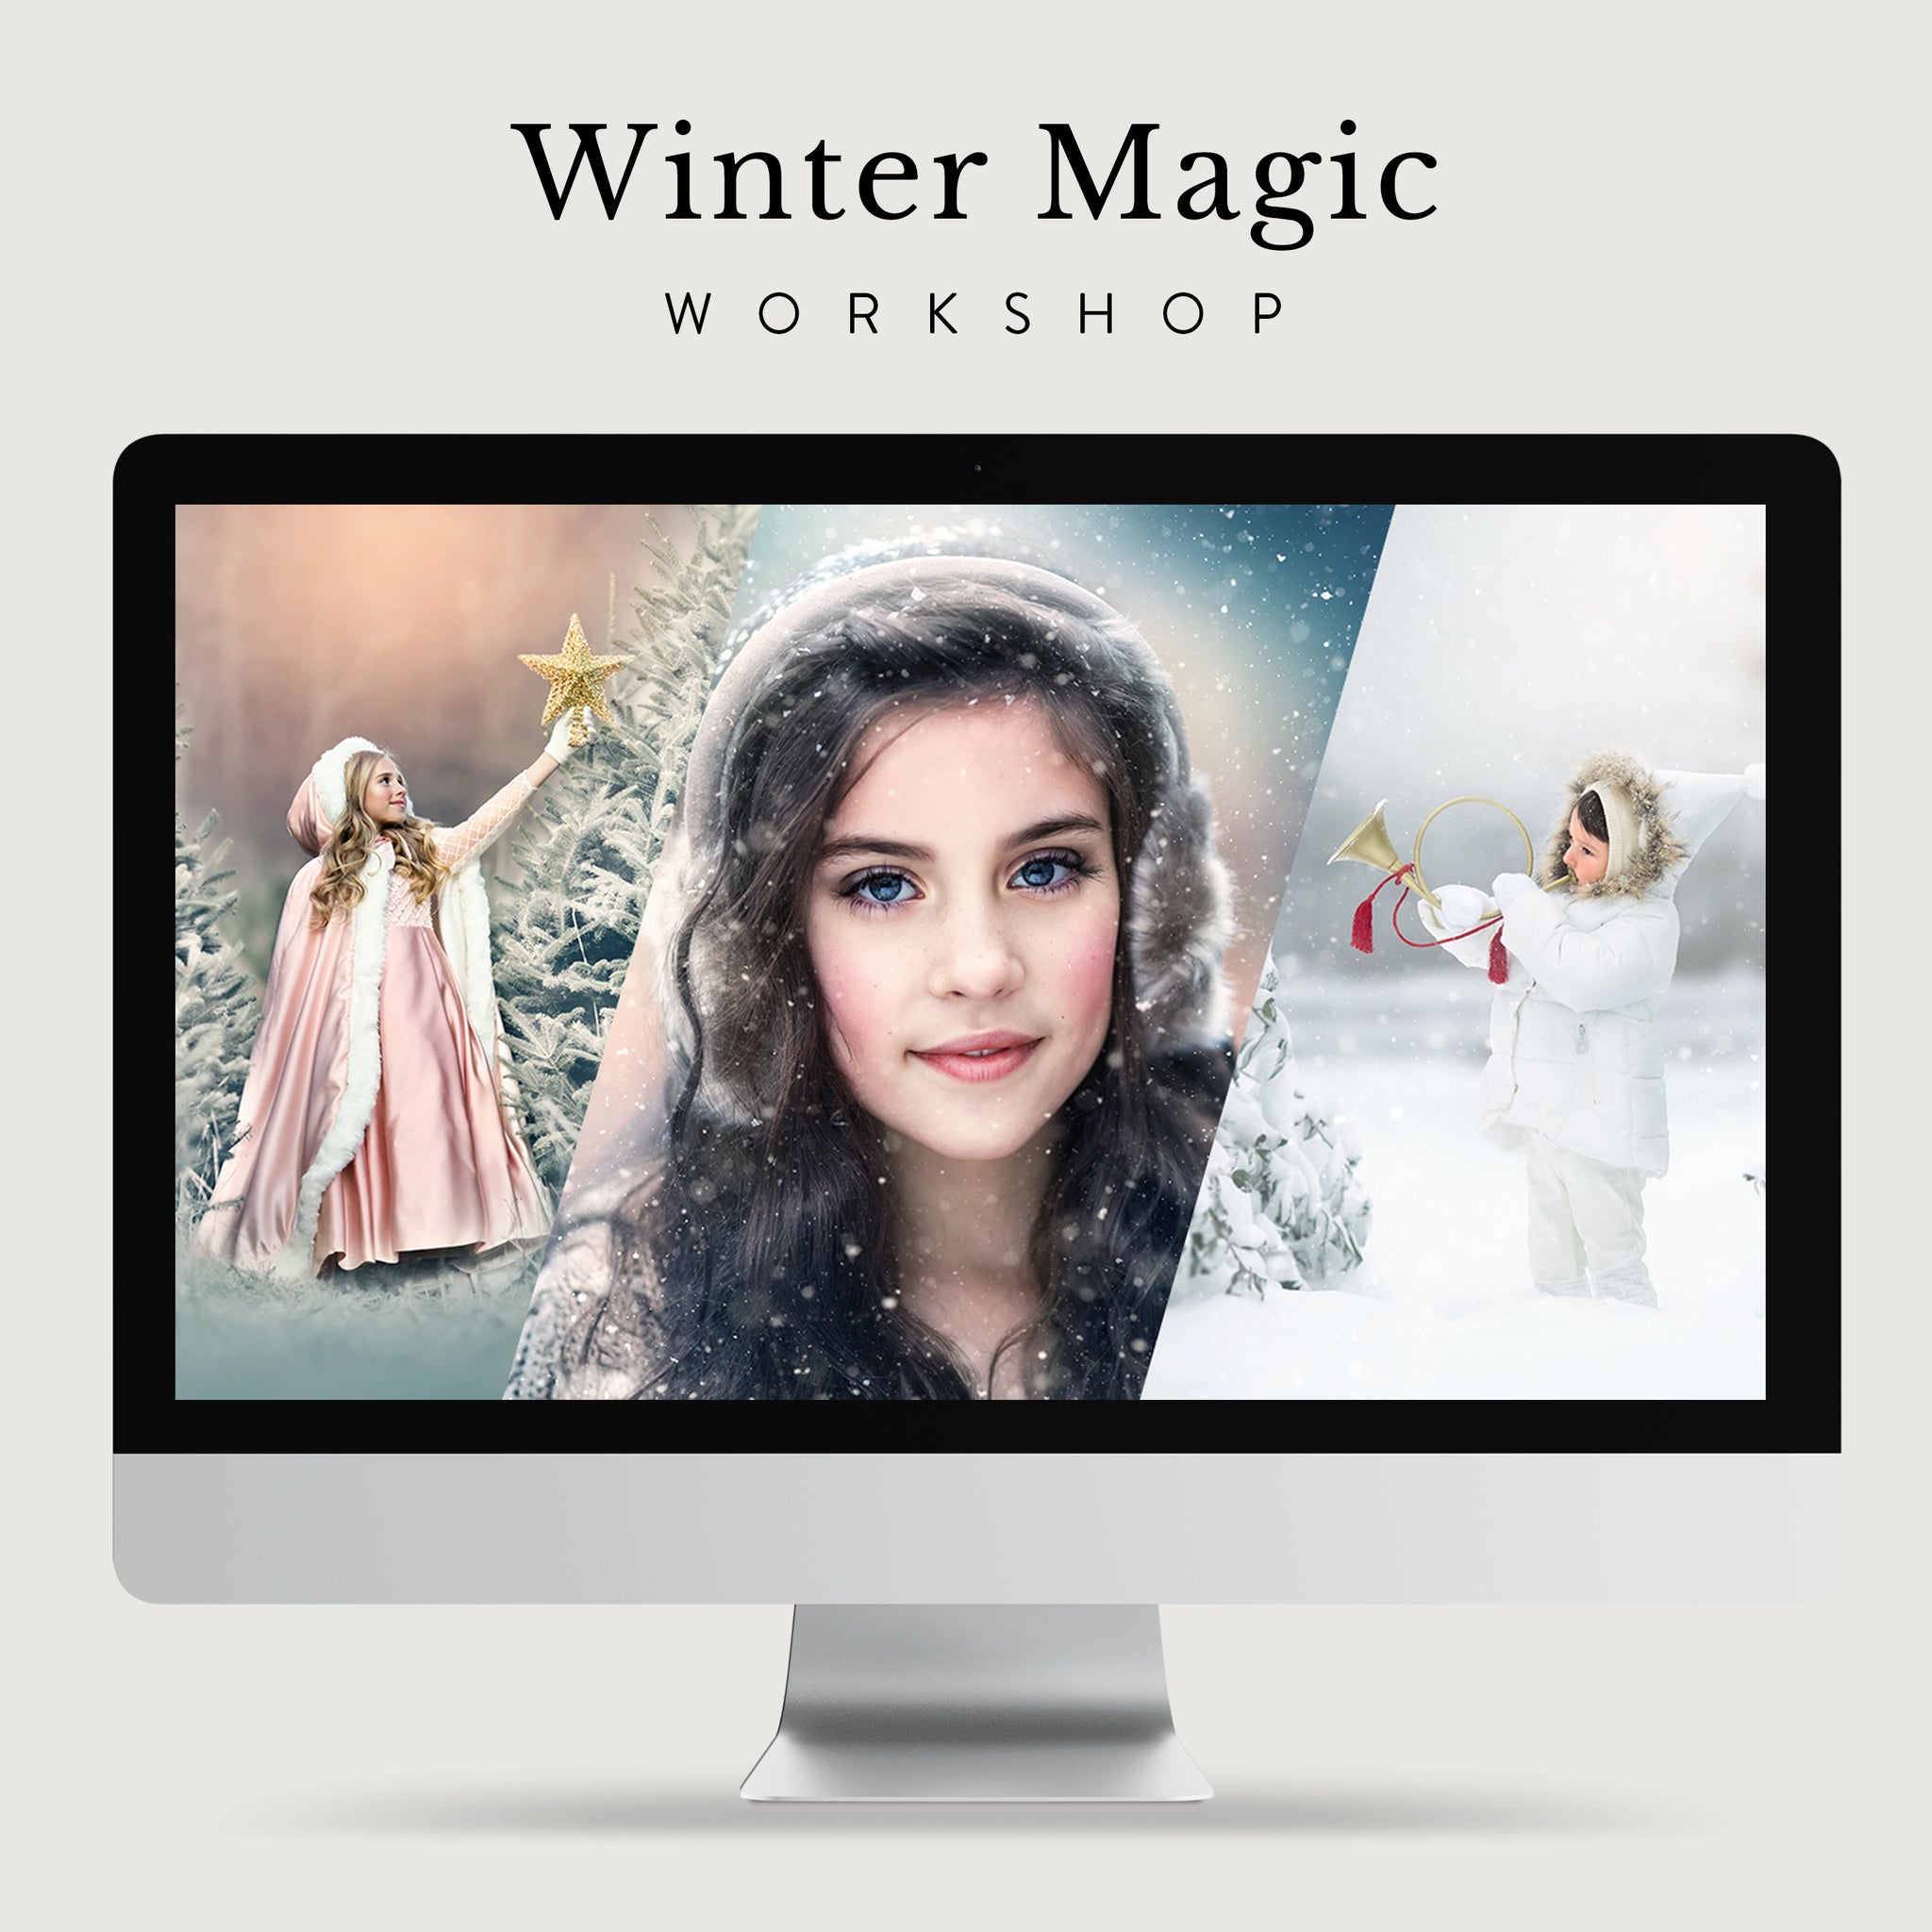 Winter photos editing course for photographers